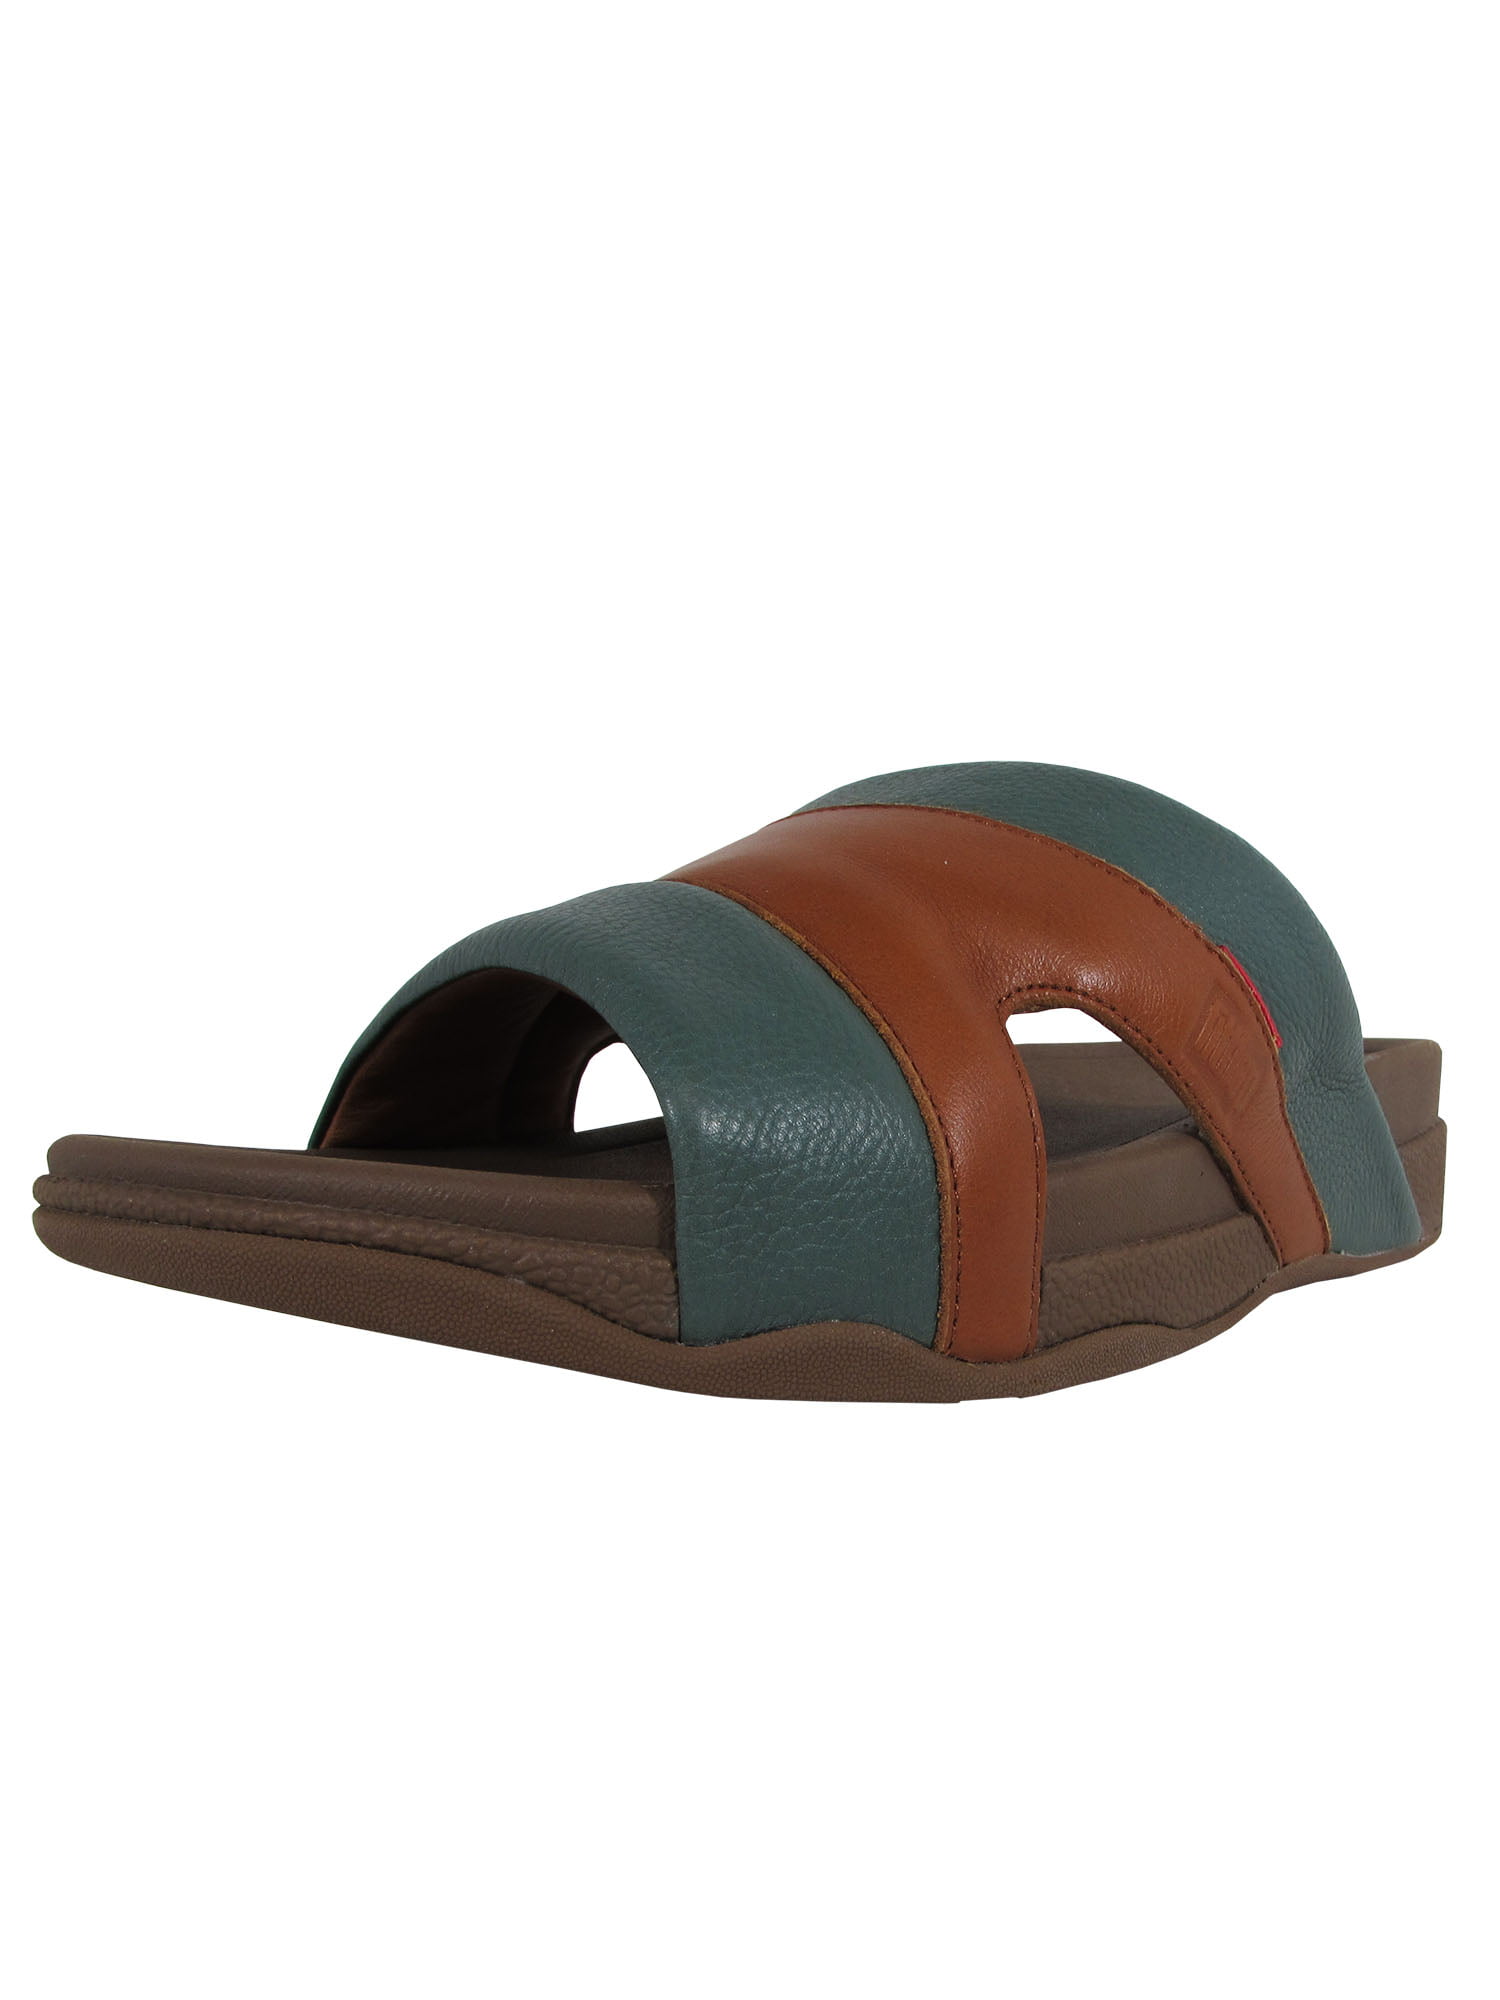 FitFlop - Fitflop Mens Freeway Leather Pool Slide Sandal Shoes, Duck ...